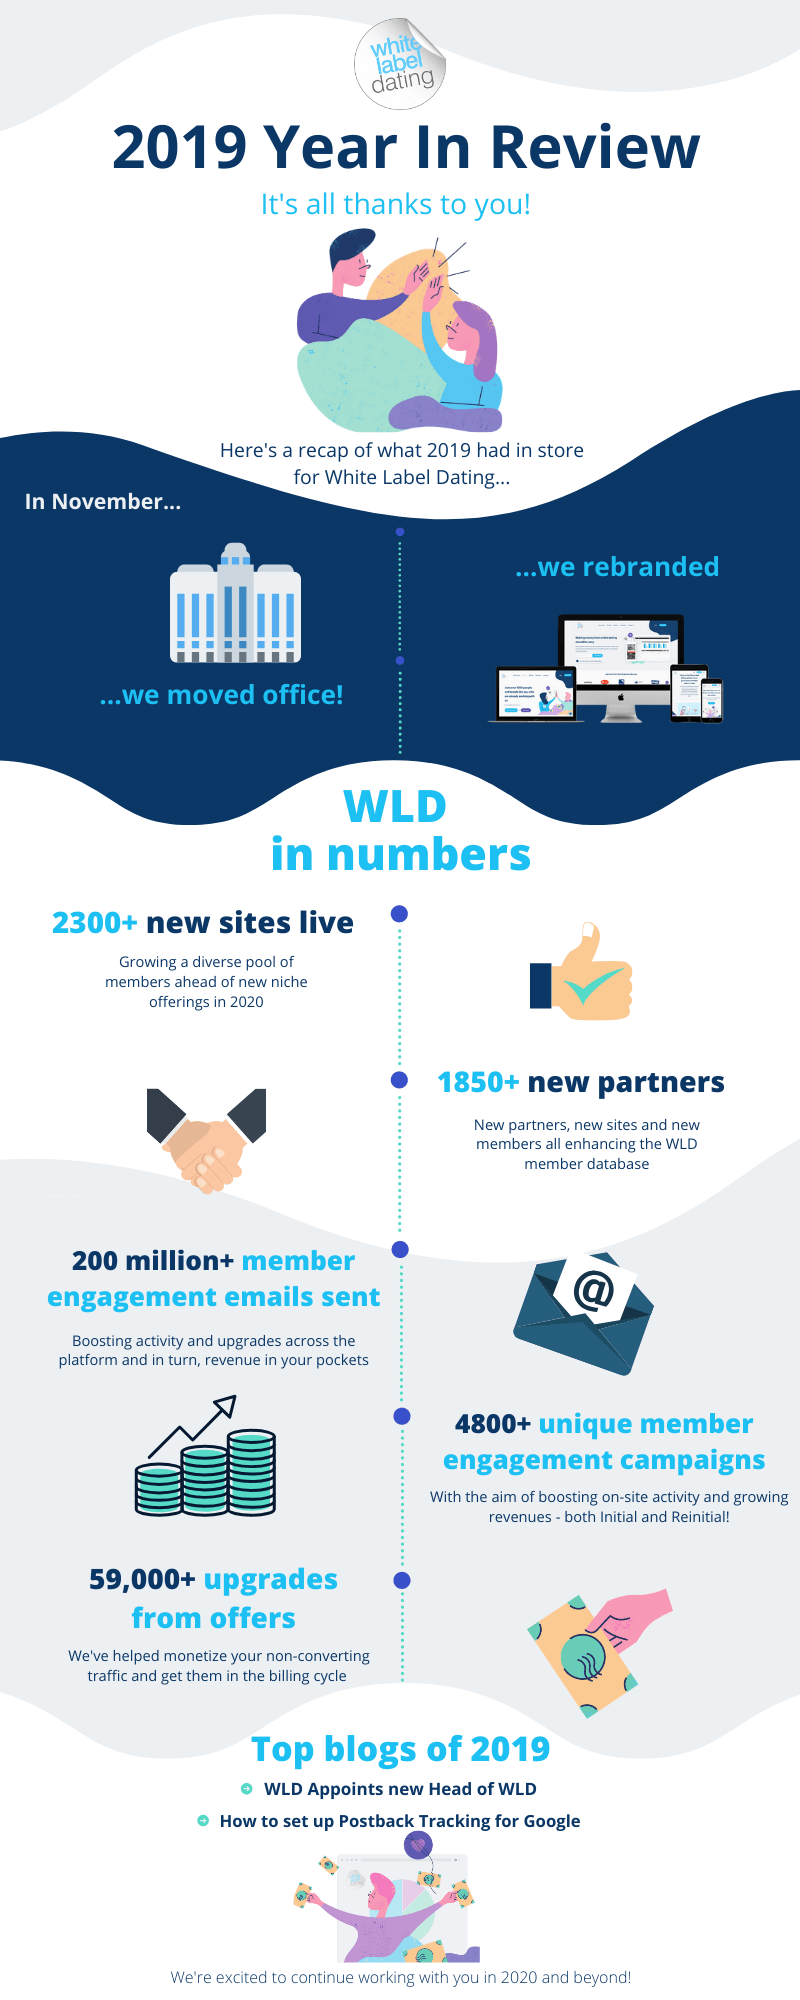 2019 was a phenomenal year for White Label Dating's Partners. We set a total of 2300+ new sites live with the majority bringing brand new members into the thriving database. An influx of new members is fantastic for enhancing the user experience and growing a diverse pool of members ahead of new niche offerings in 2020.  With the aim of boosting on-site activity and growing revenues for our partners, our dedicated engagement team took a proactive approach to optimise a comprehensive engagement schedule. This resulted in an outstanding 59,000+ upgrades just from bespoke offers and incentives sent to members. Our member engagement team continued to engage the database with 200+ million emails sent from 4800+ unique member engagement campaigns, booting activity and upgrades across the platform and in turn, revenue in your pockets.